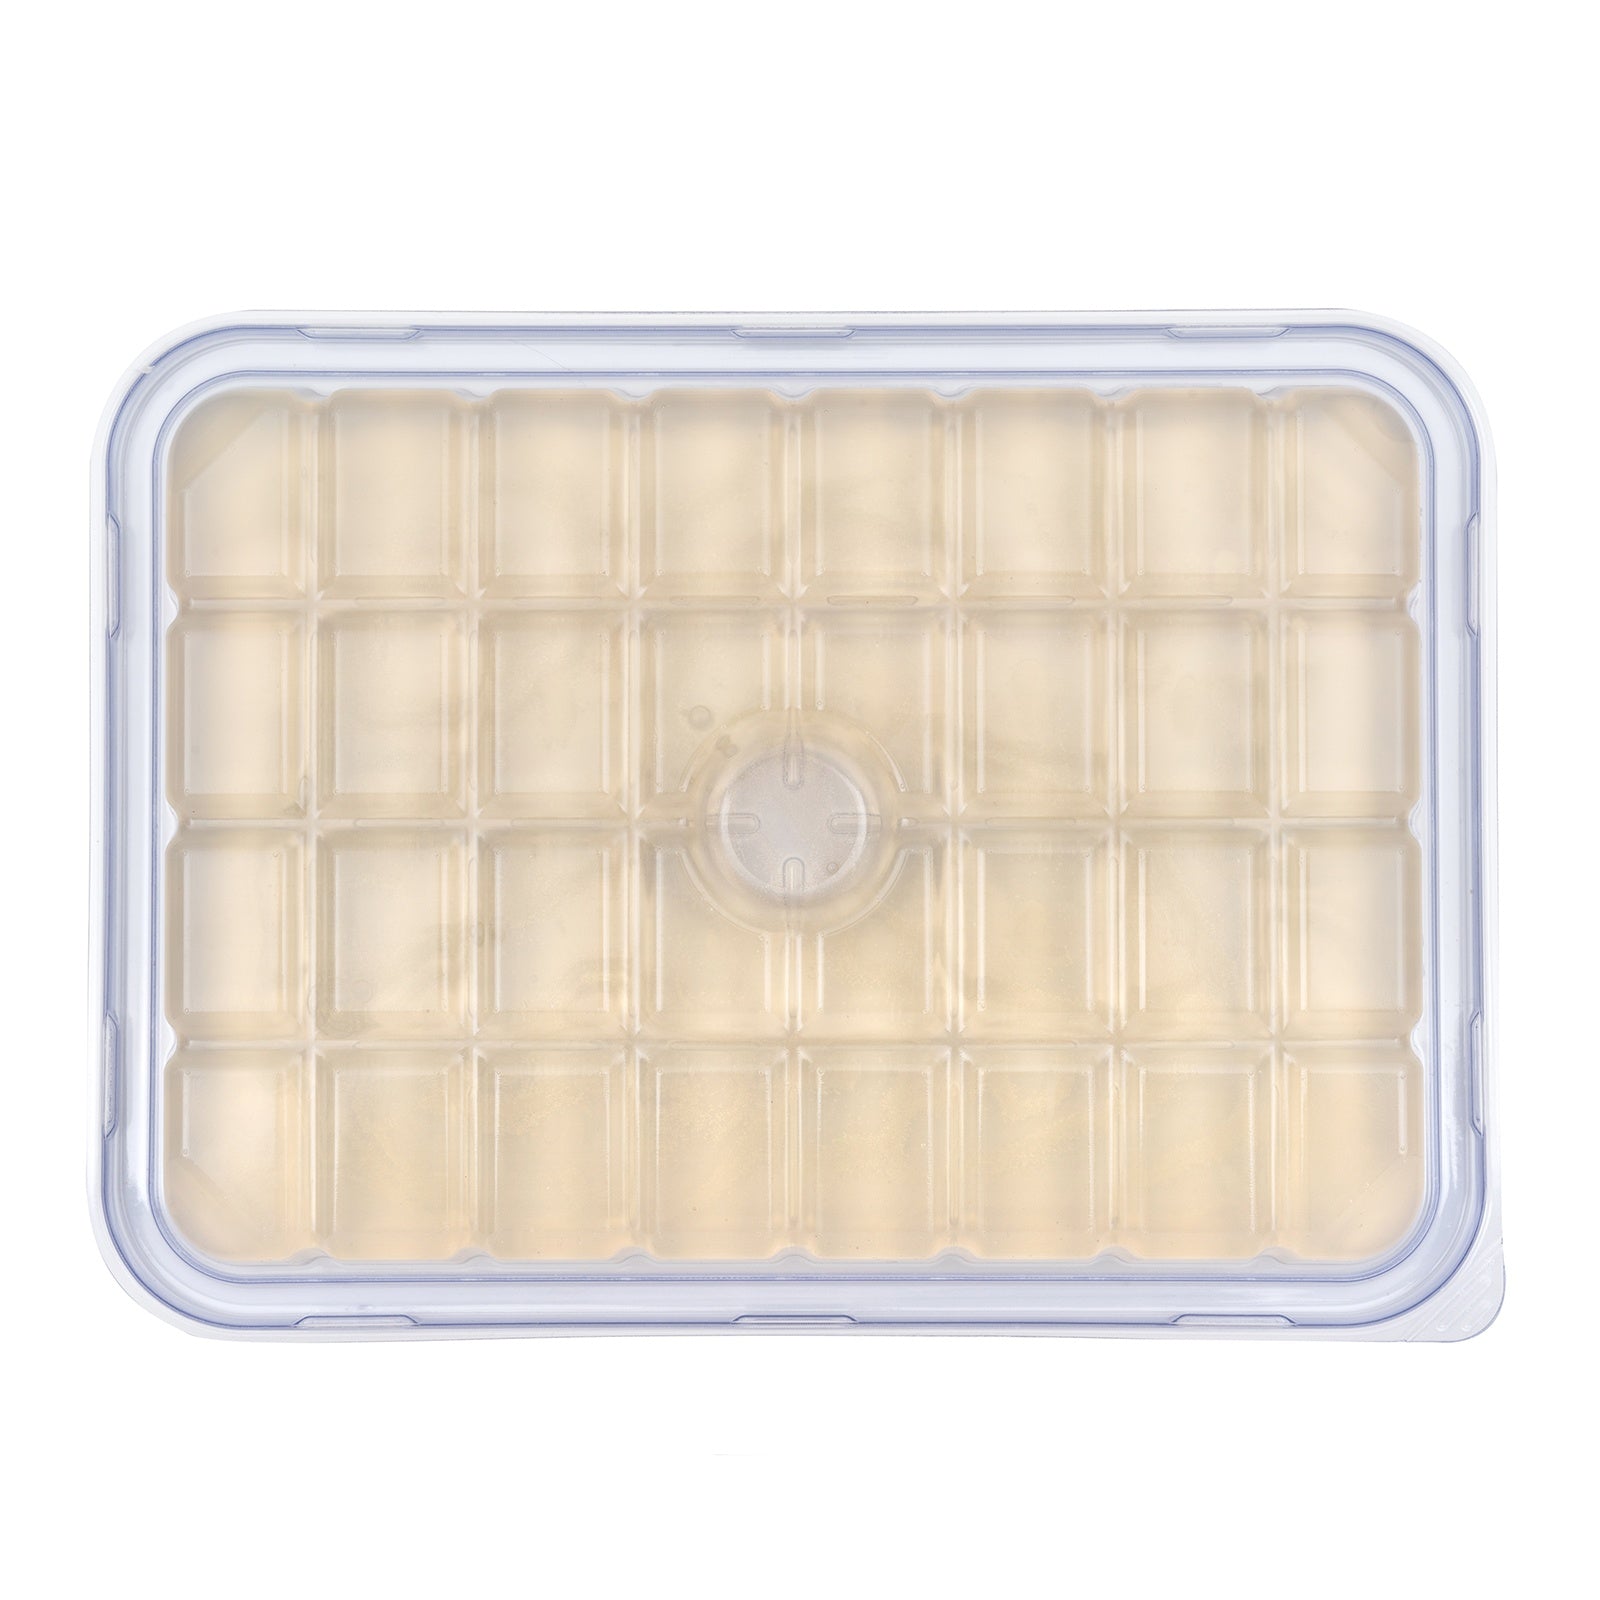 We R Makers Silicone SUDS Soap-Making Mold Set of 3 - 20831180